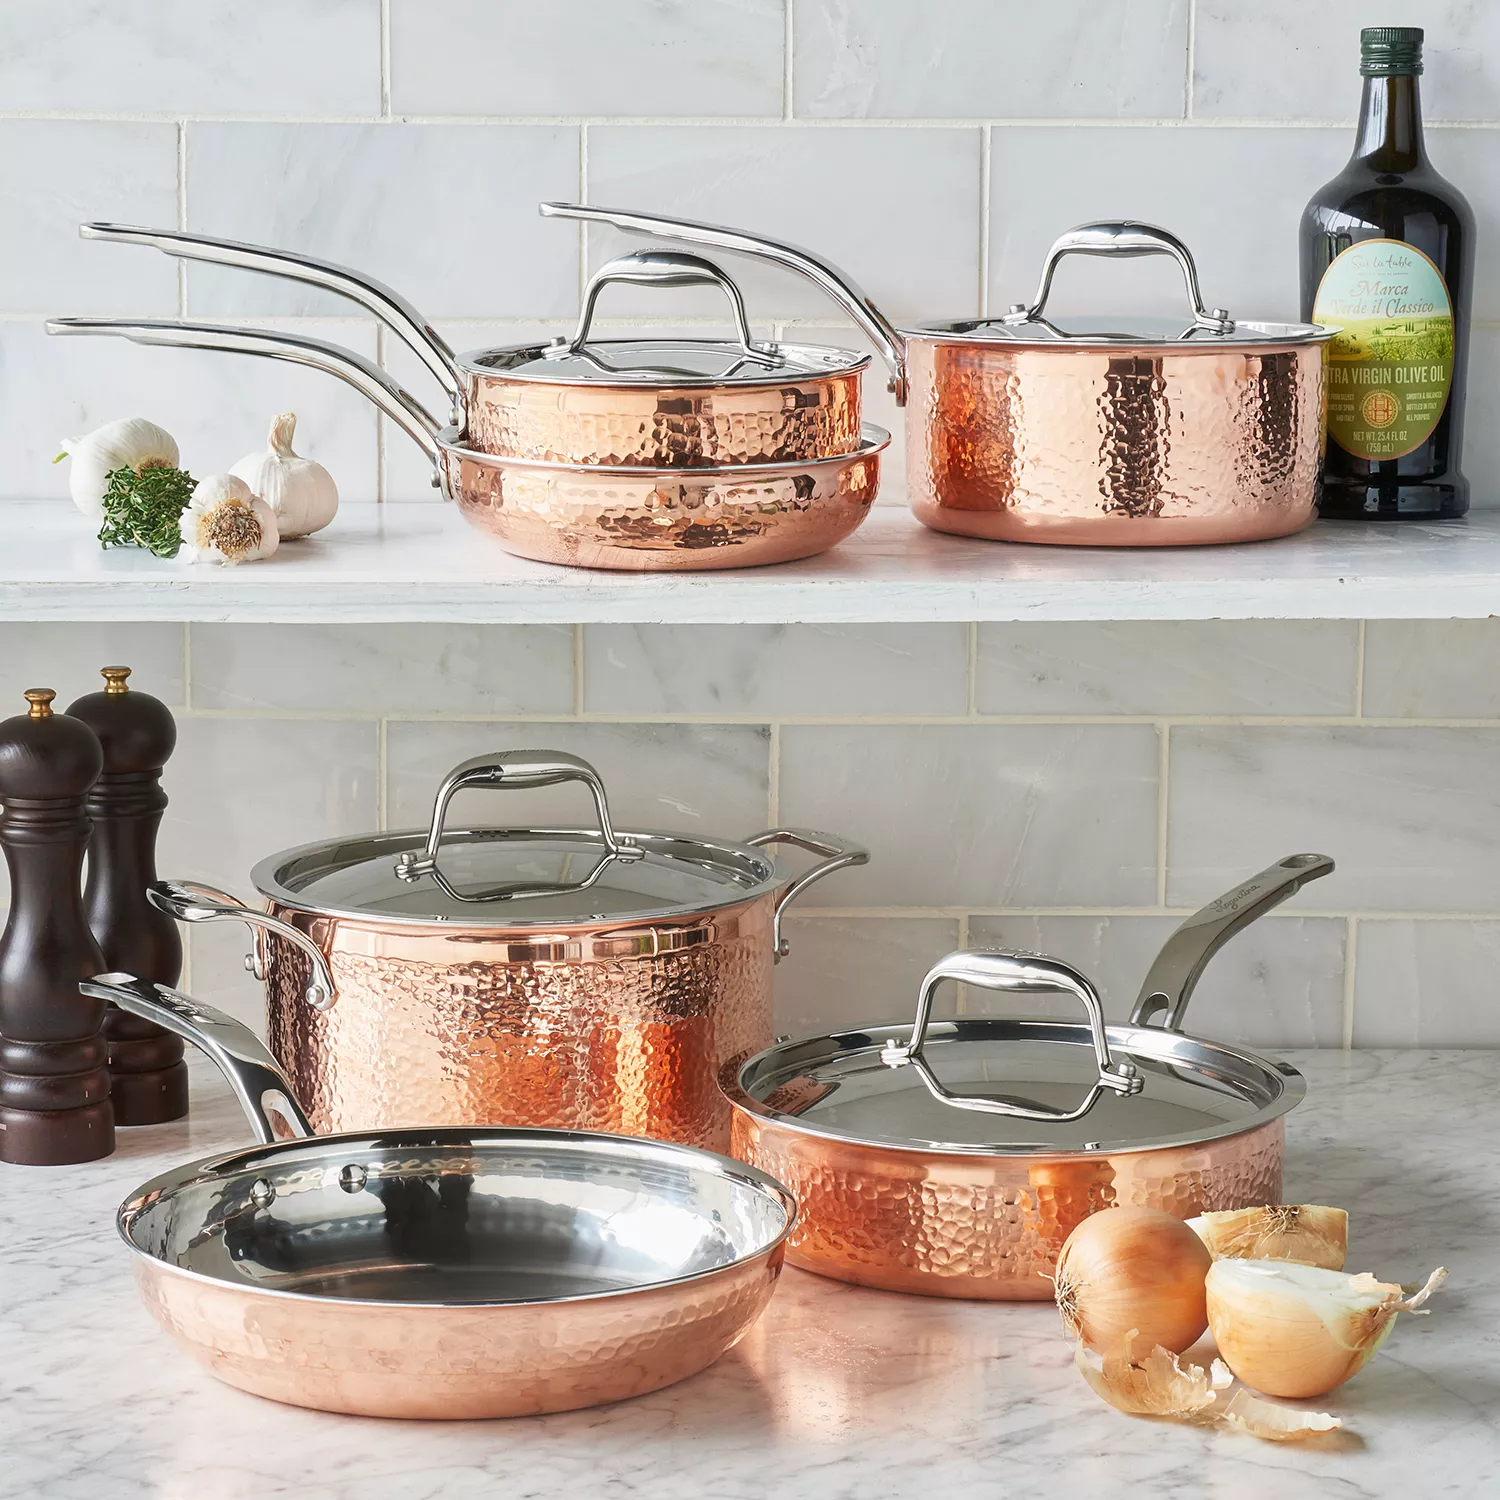 Black & Copper Kitchen Utensils with Copper Utensil Holder- 17PC Set:  Measuring Cups and Spoons, Rose Gold Kitchen Utensils Set - Black and  Copper